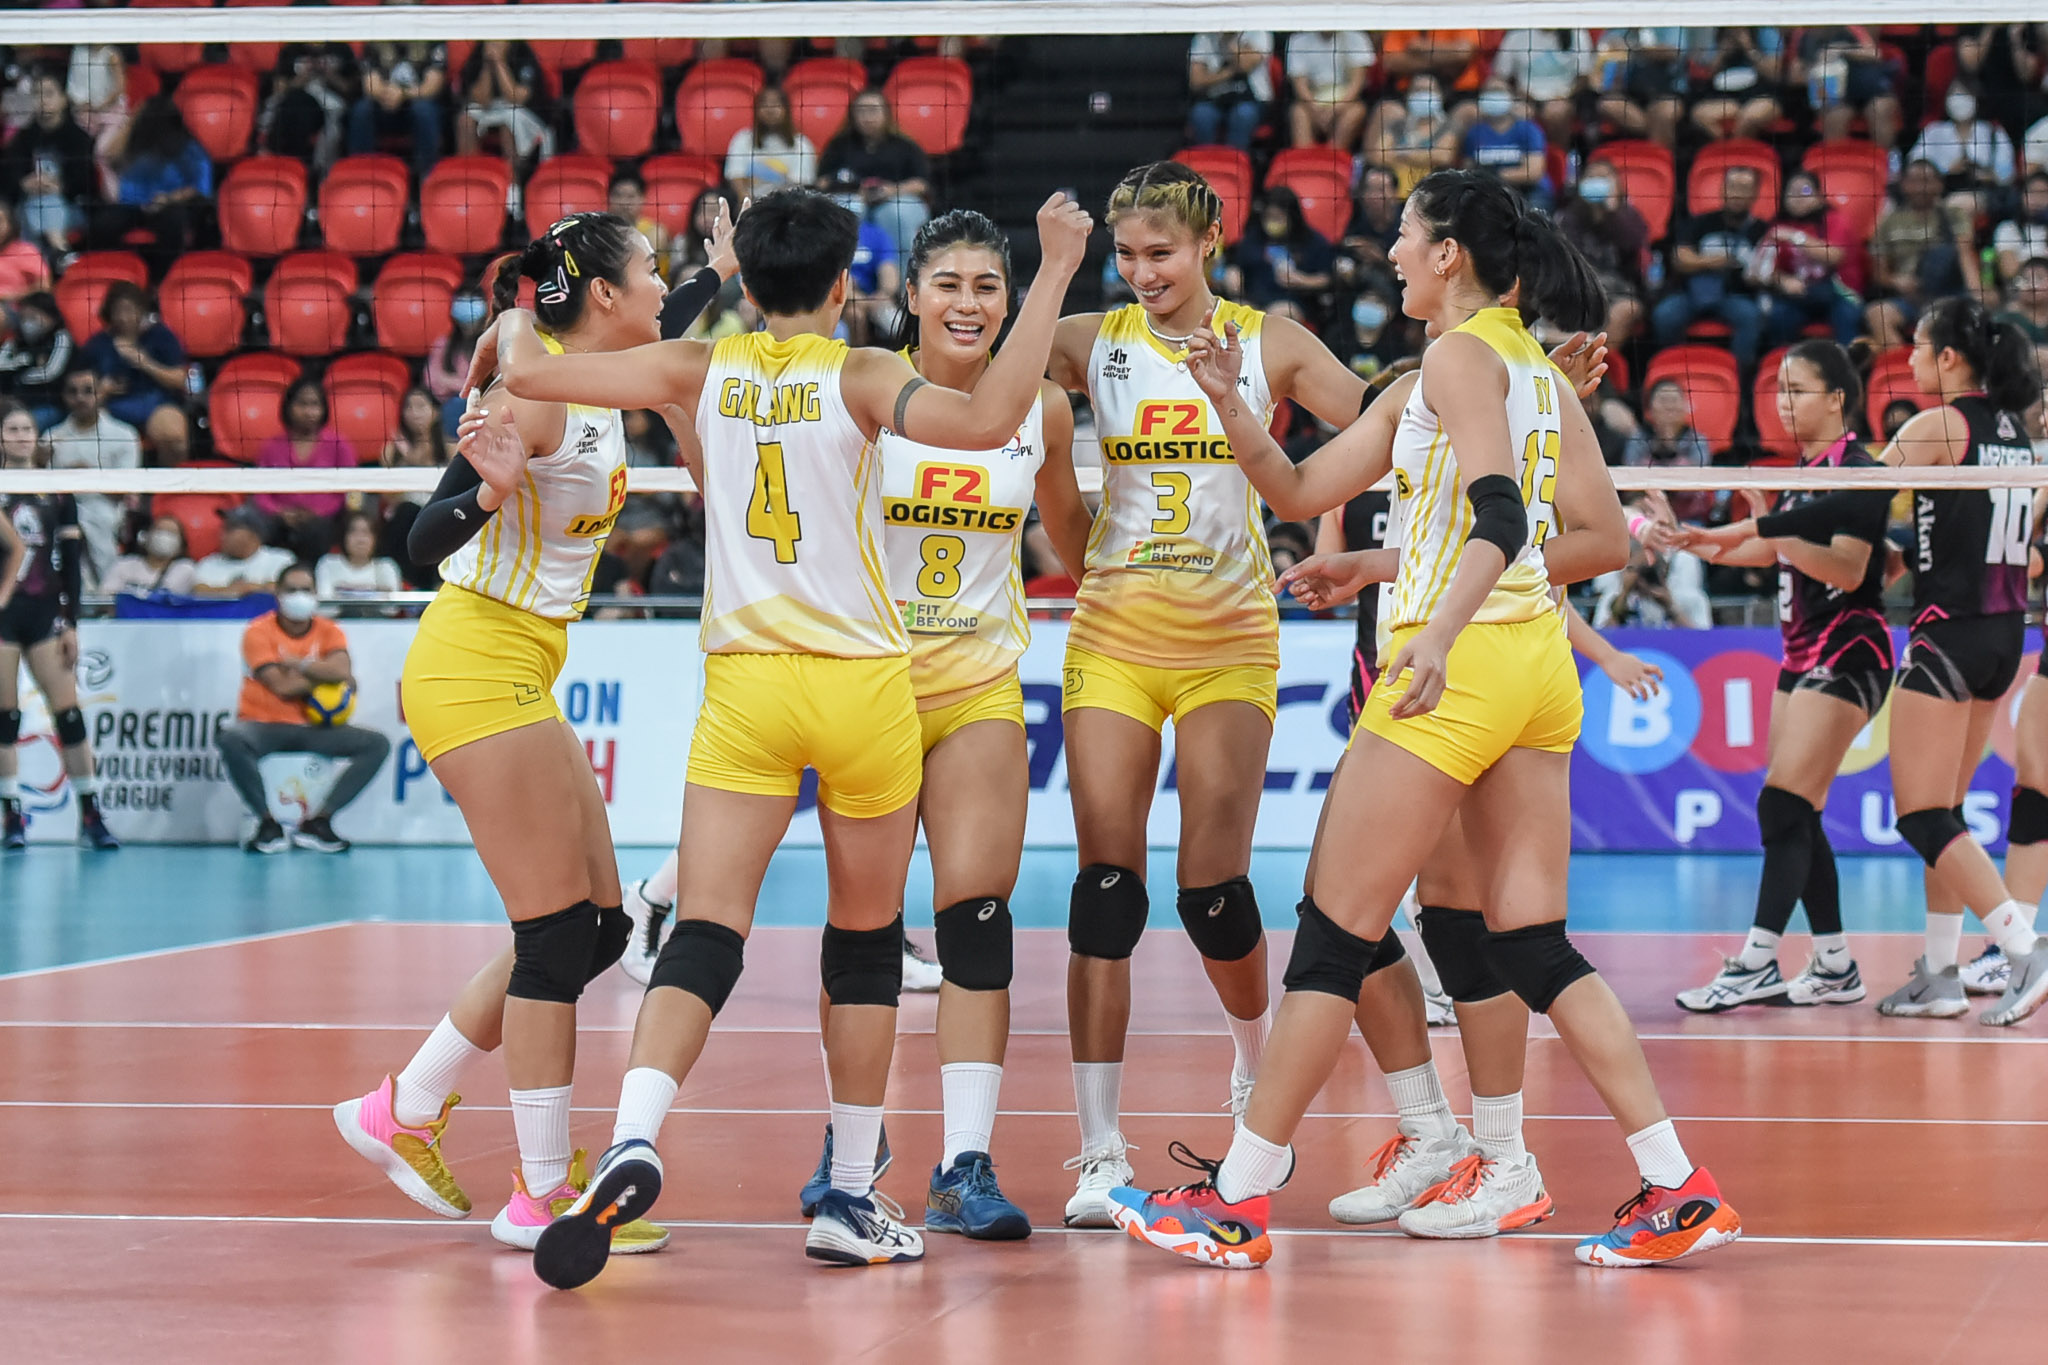 F2 Logistics Cargo Movers in the PVL All-Filipino Conference. –PVL PHOTO